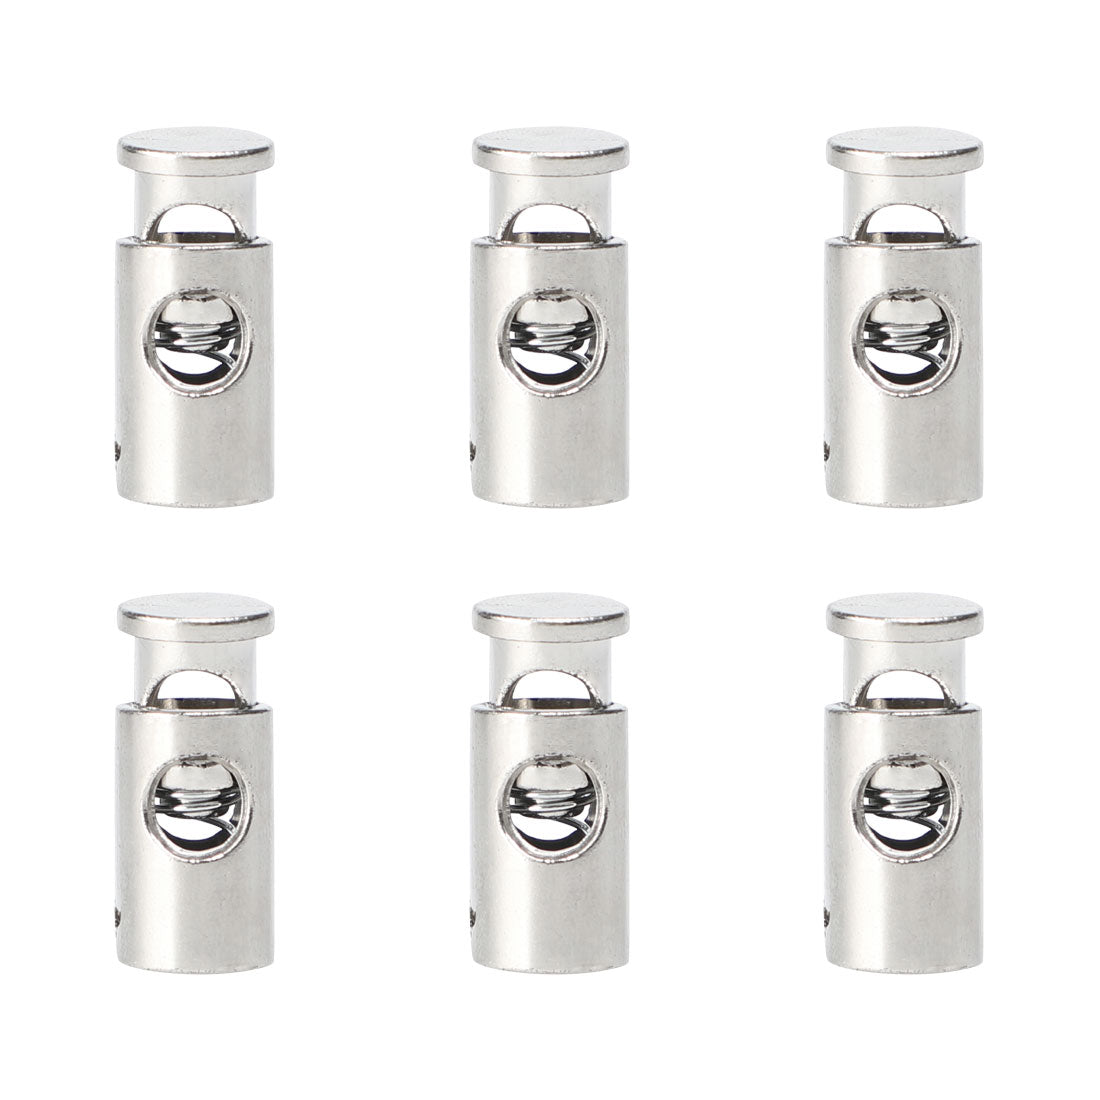 uxcell Uxcell 6pcs Plastic Cord Lock Stoppers Spring Toggle Fastener Organizer Silver Tone